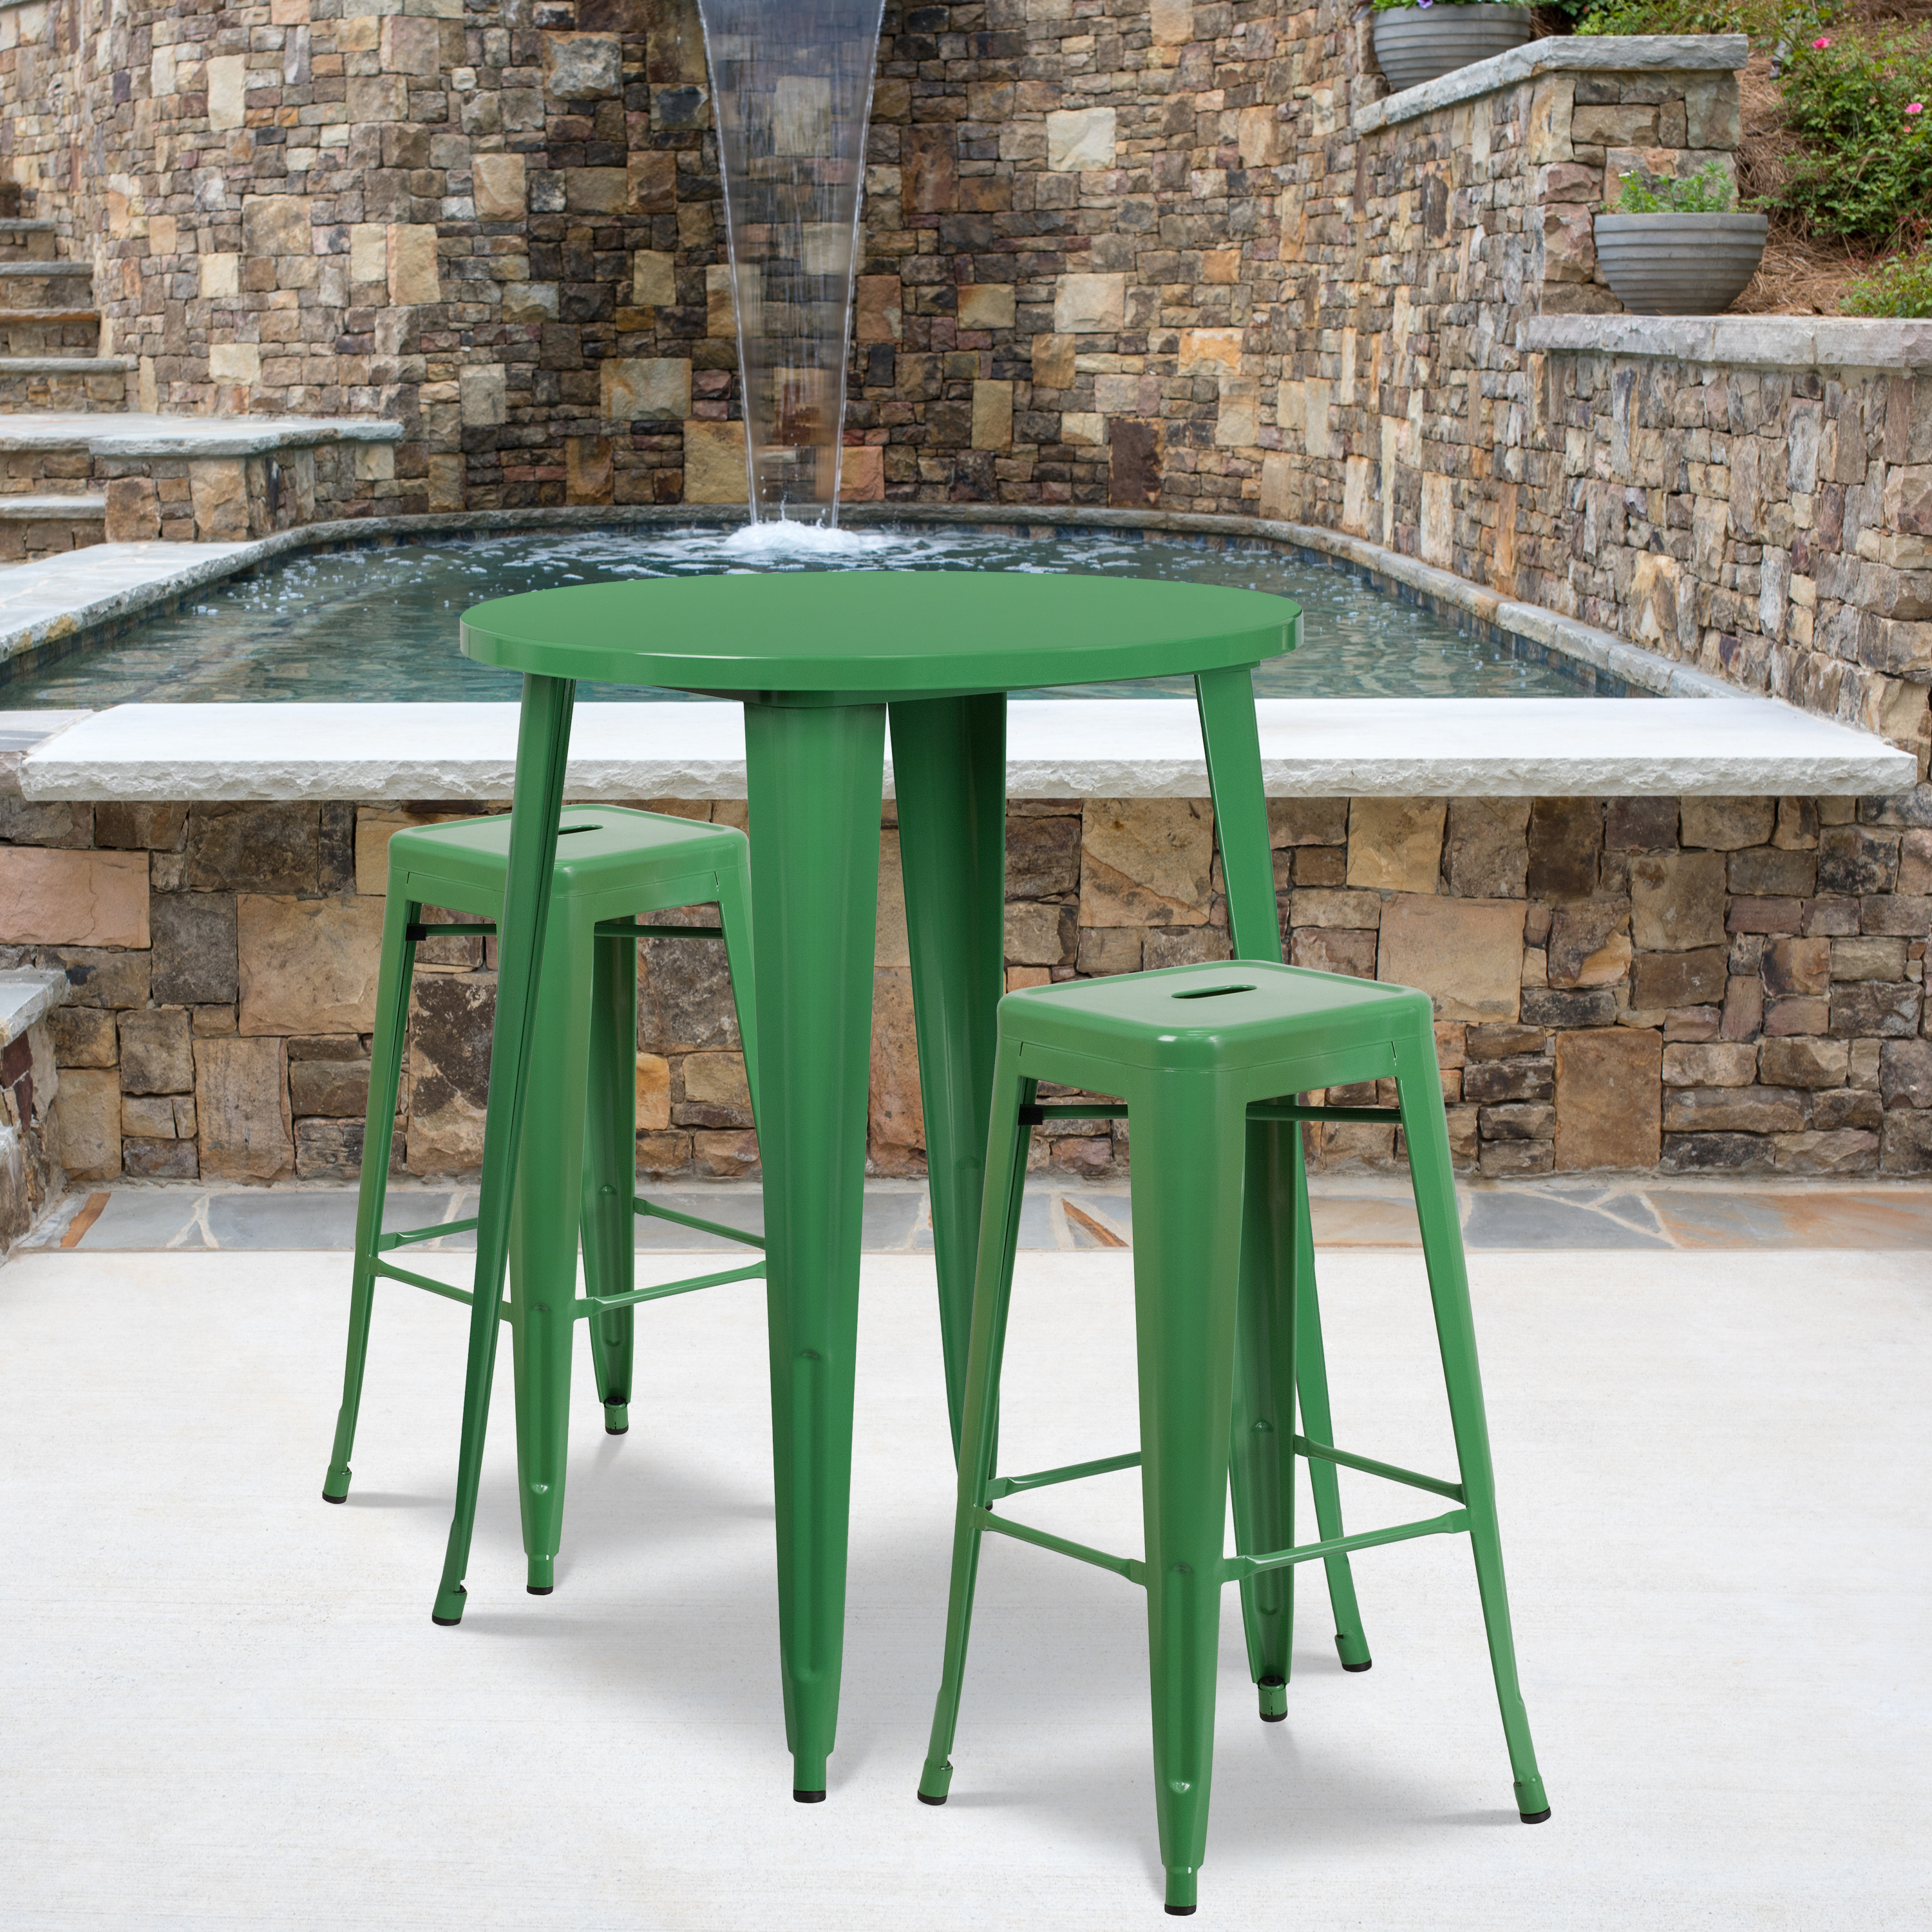 Flash Furniture Commercial Grade 30" Round Green Metal Indoor-Outdoor Bar Table Set with 2 Square Seat Backless Stools - image 2 of 5